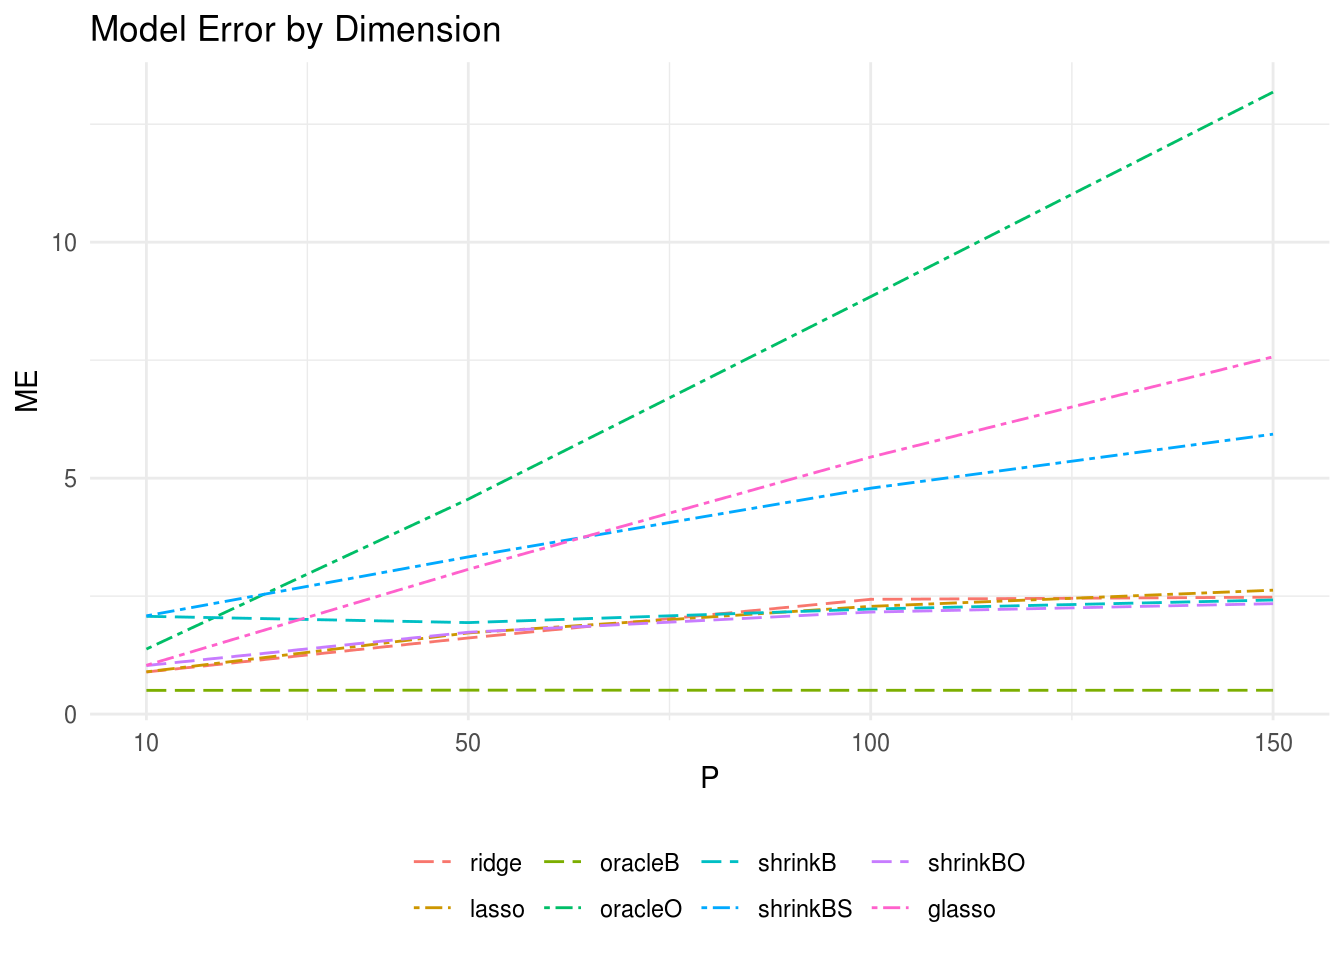 The oracle precision matrices were tri-diagonal with variable dimension (p) and the data was generated with sample size n = 100 and response vector dimension r = 10. The model errors (ME) for each estimator with variable dimension of the predictor matrix are plotted. shrinkBO and shrinkB were the two best-performing estimators closely follow by the ridge and lasso regression estimators.